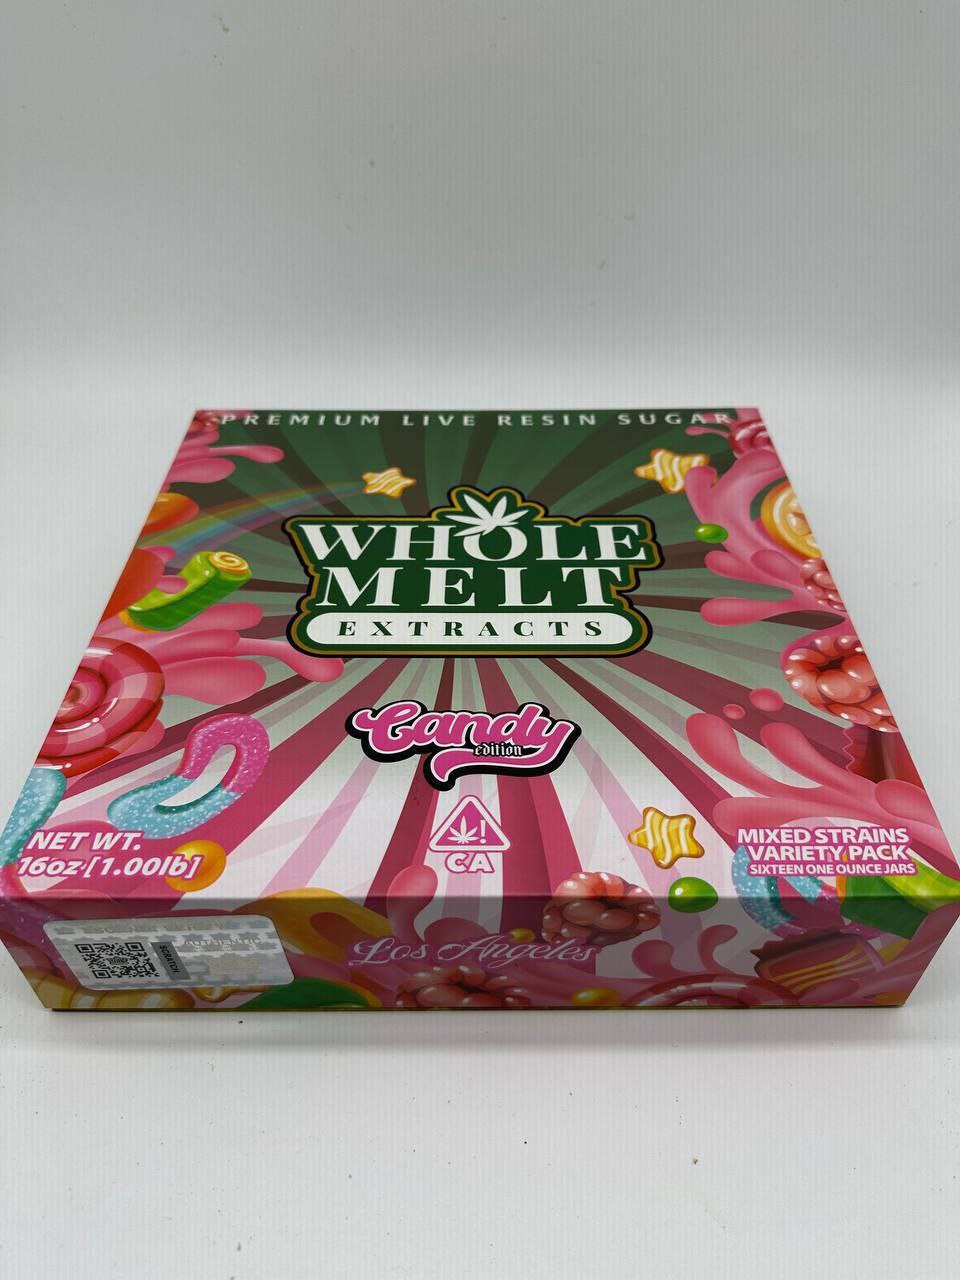 A colorful box of Import placeholder for 23, featuring a "mixed strains variety pack." The box design includes vibrant graphics of gummy worms and candy, with text indicating "premium live resin sugar," "16 oz.," and a California compliance symbol.